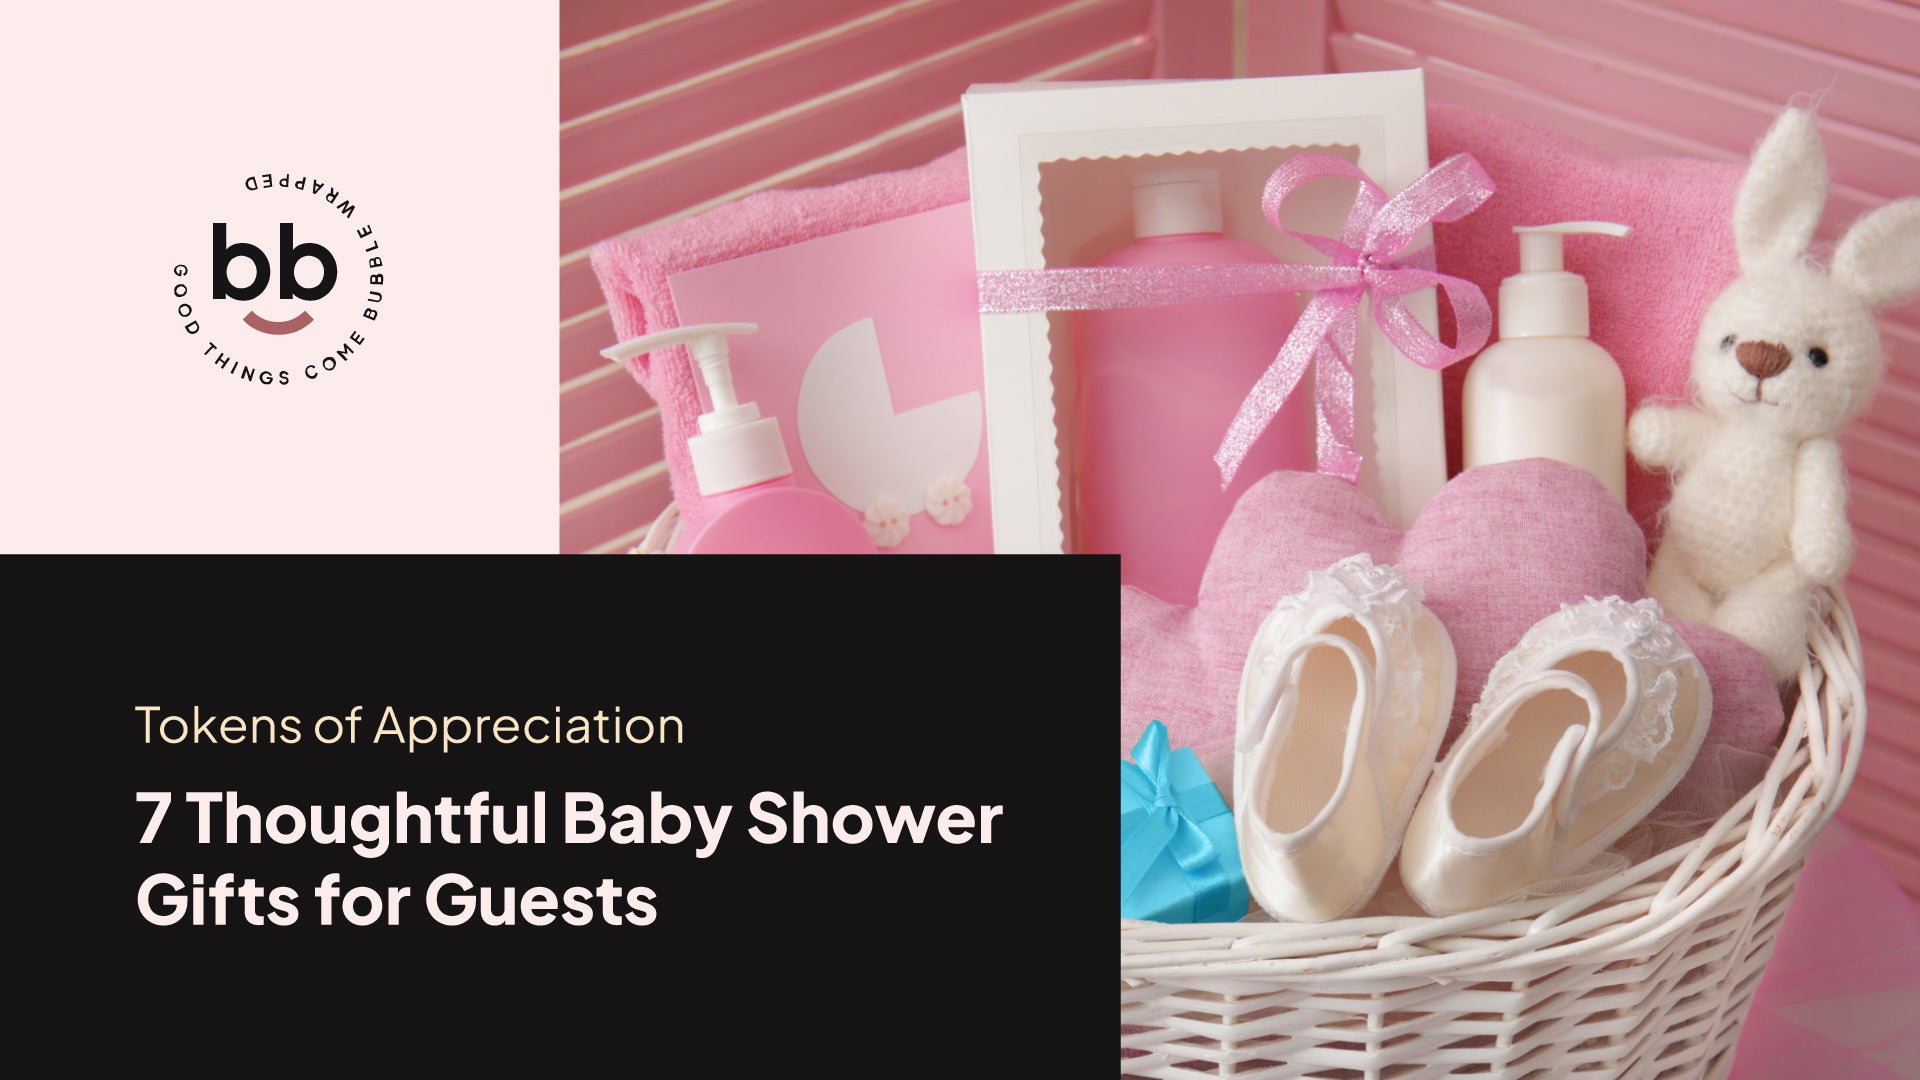 Tokens of Appreciation: 7 Thoughtful Baby Shower Gifts for Guests